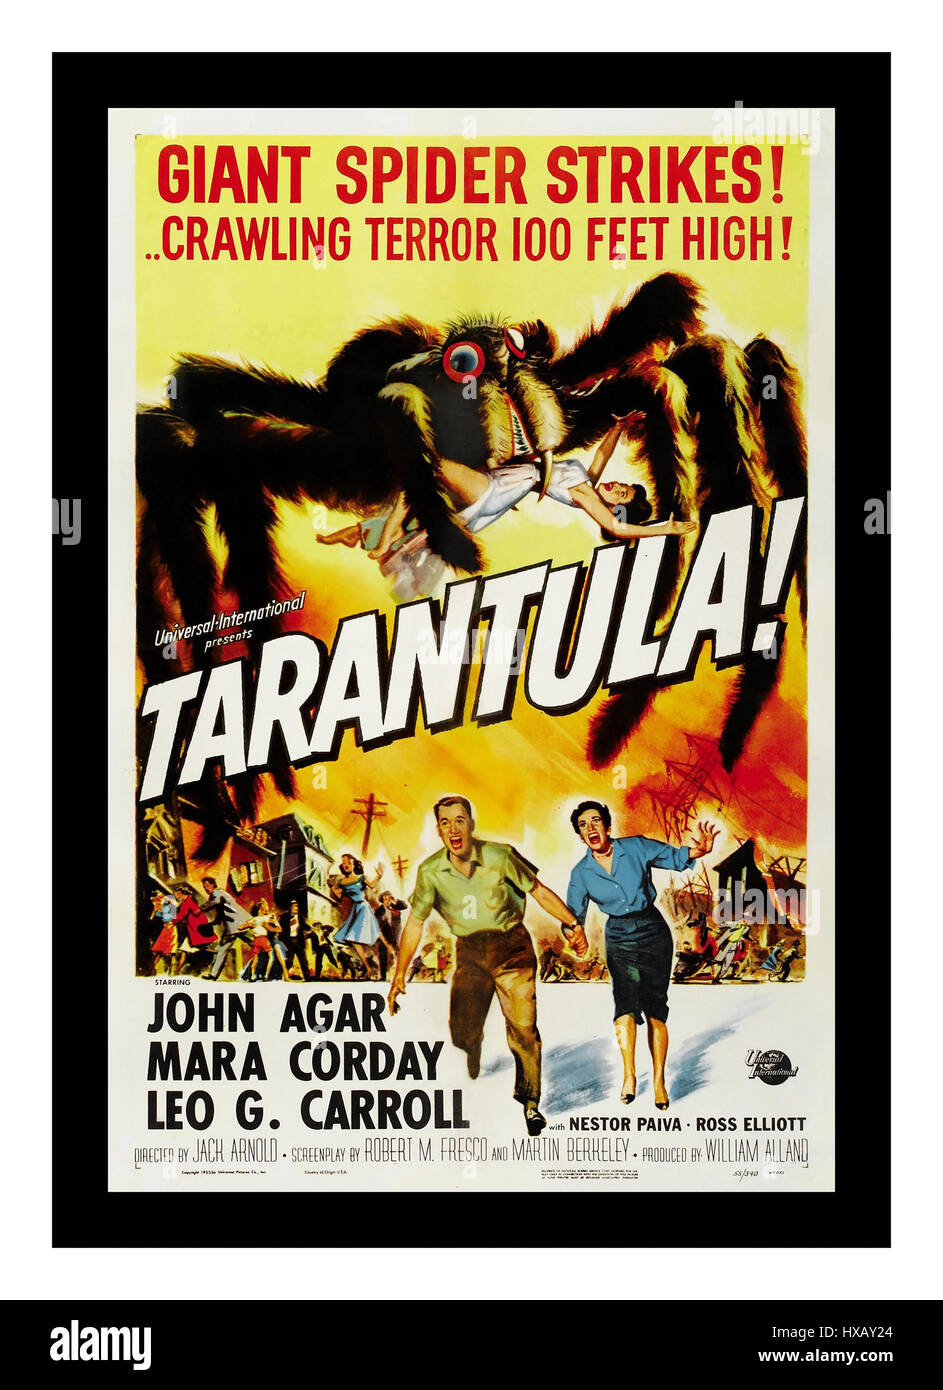 Vintage retro film poster for 'Tarantula'  a 1955 American black-and-white science fiction film from Universal-International, produced by William Alland, directed by Jack Arnold, that stars John Agar, Mara Corday, and Leo G. Carroll. Stock Photo